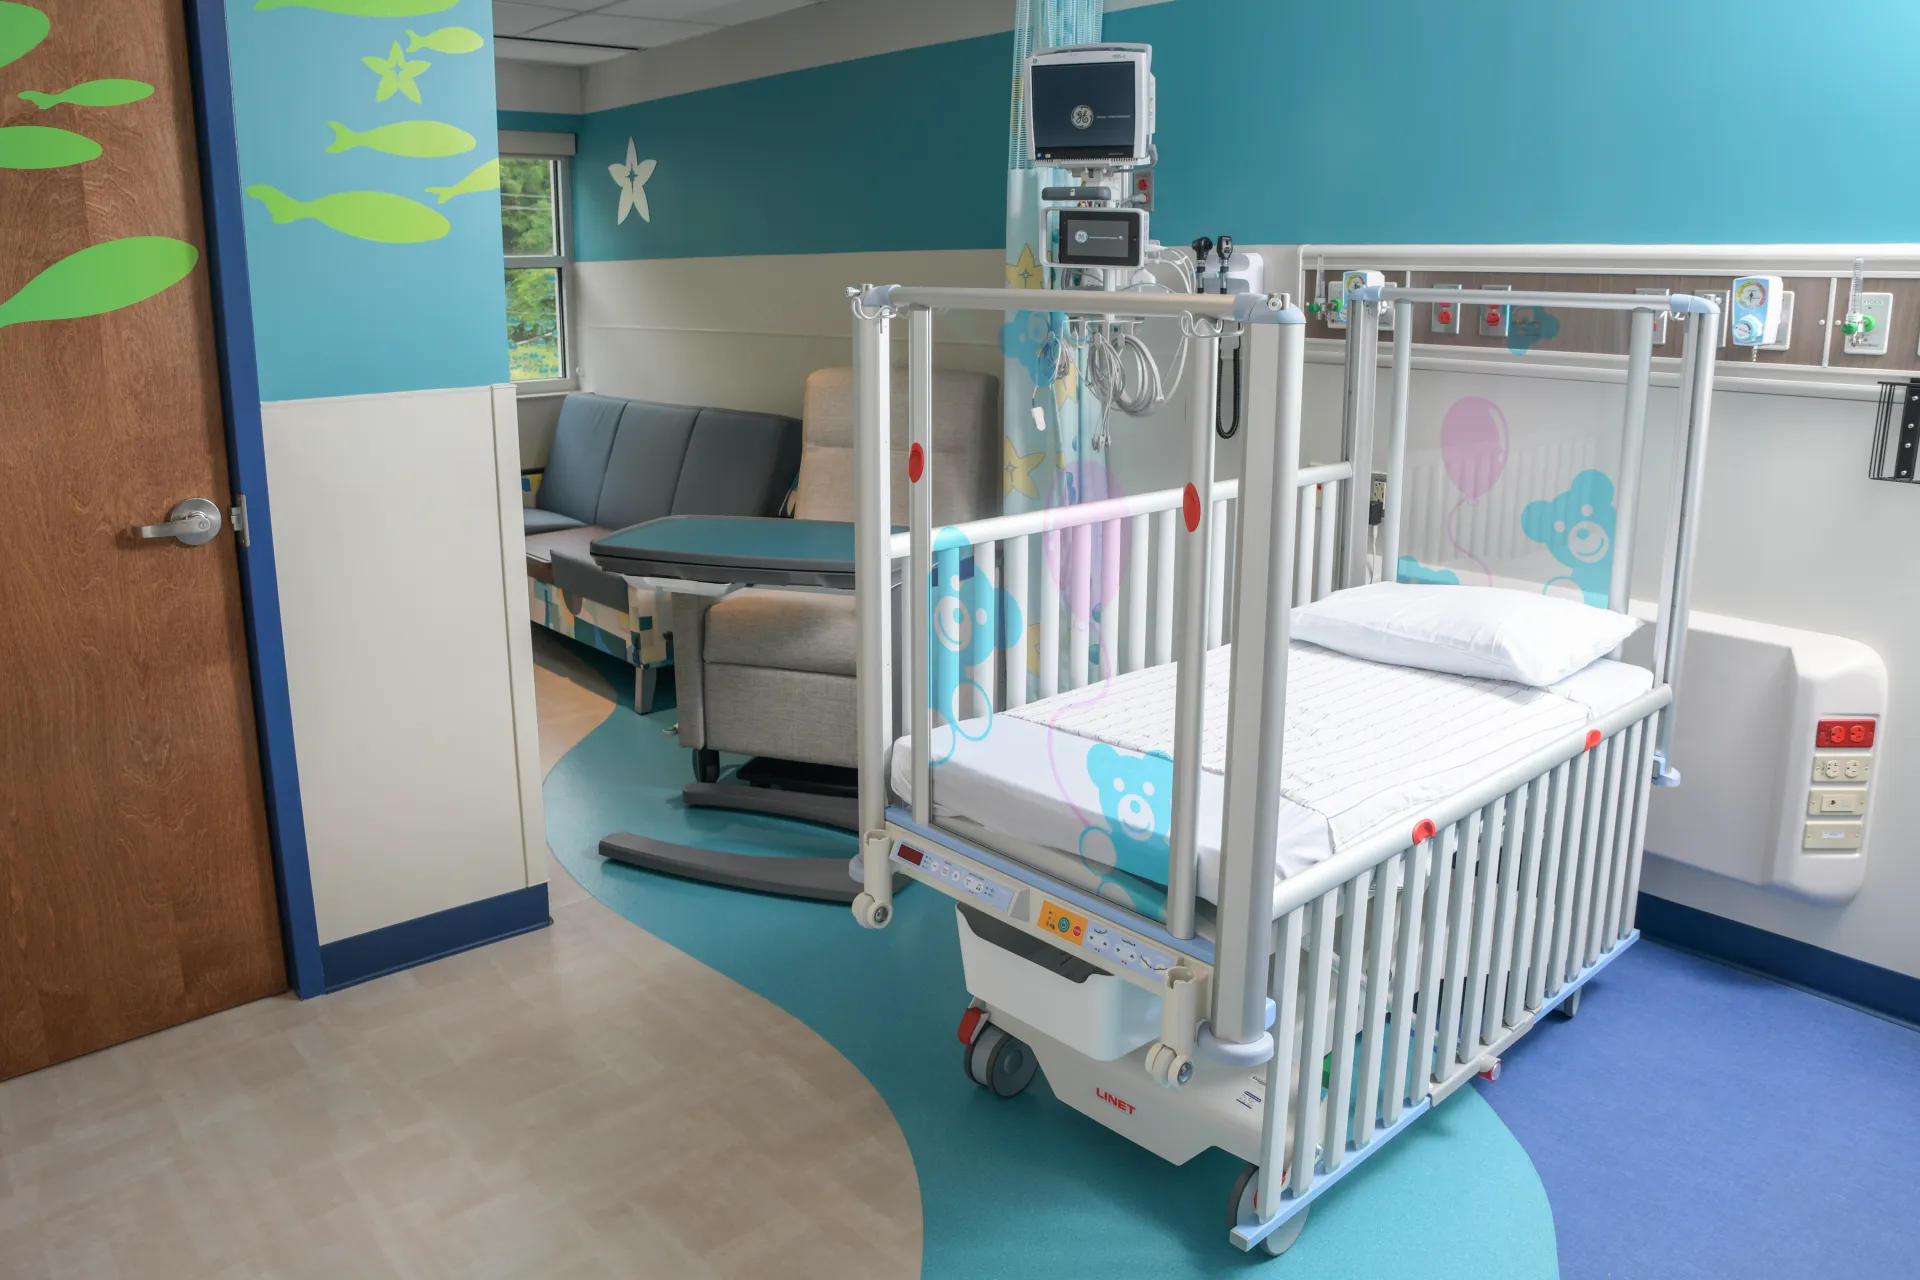 Hospital room with a child's crib